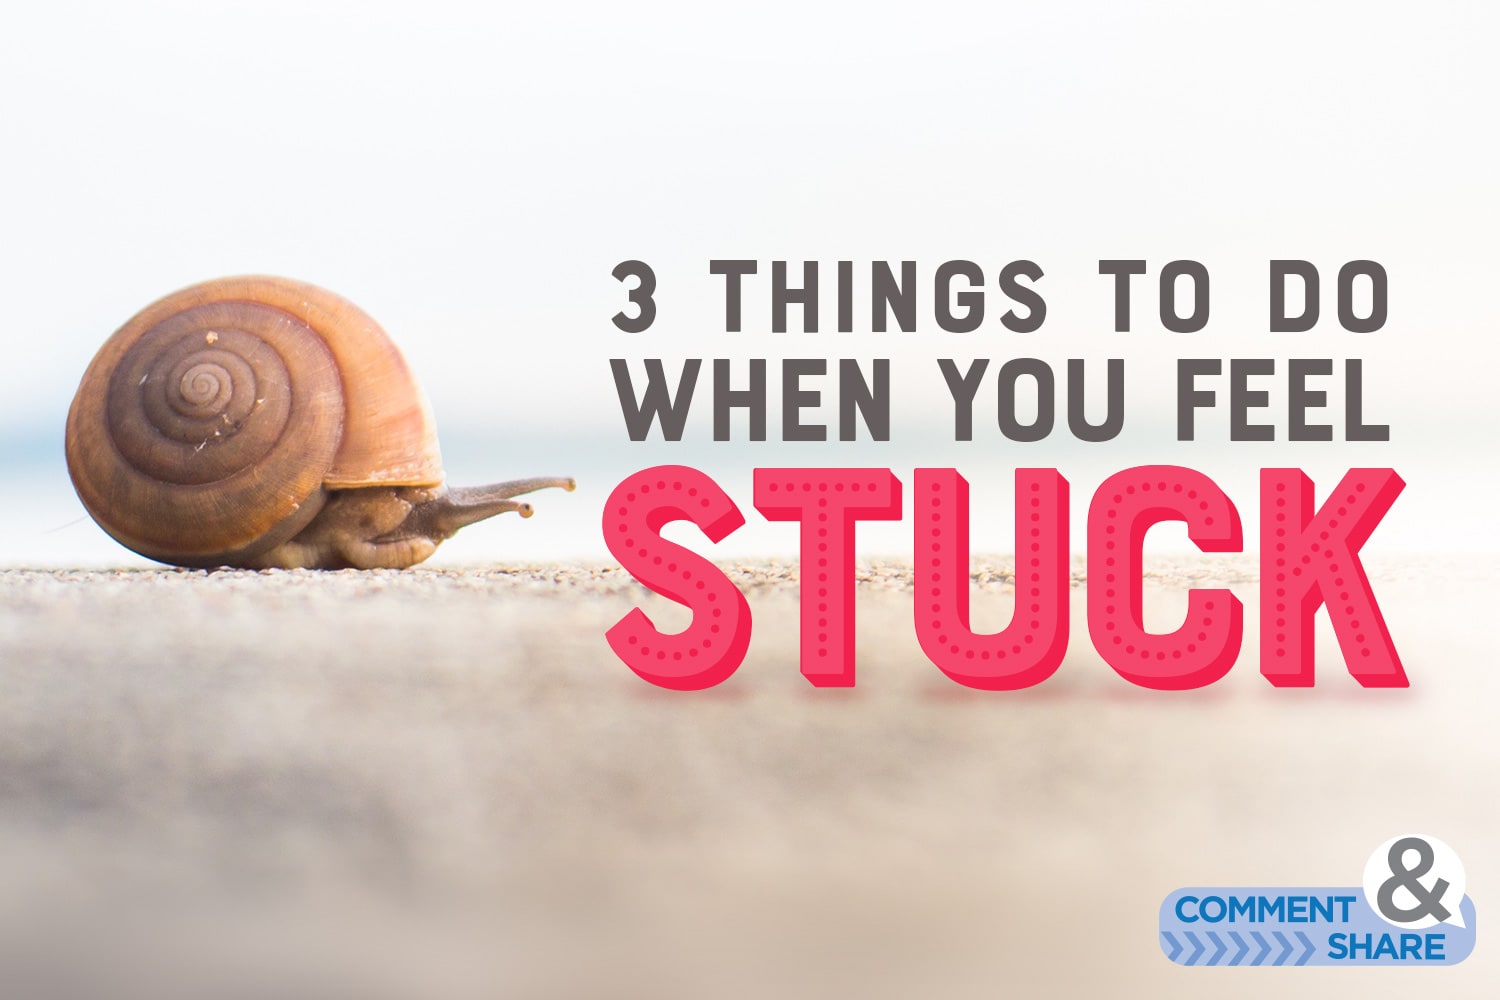 3 Things to Do When You Feel Stuck